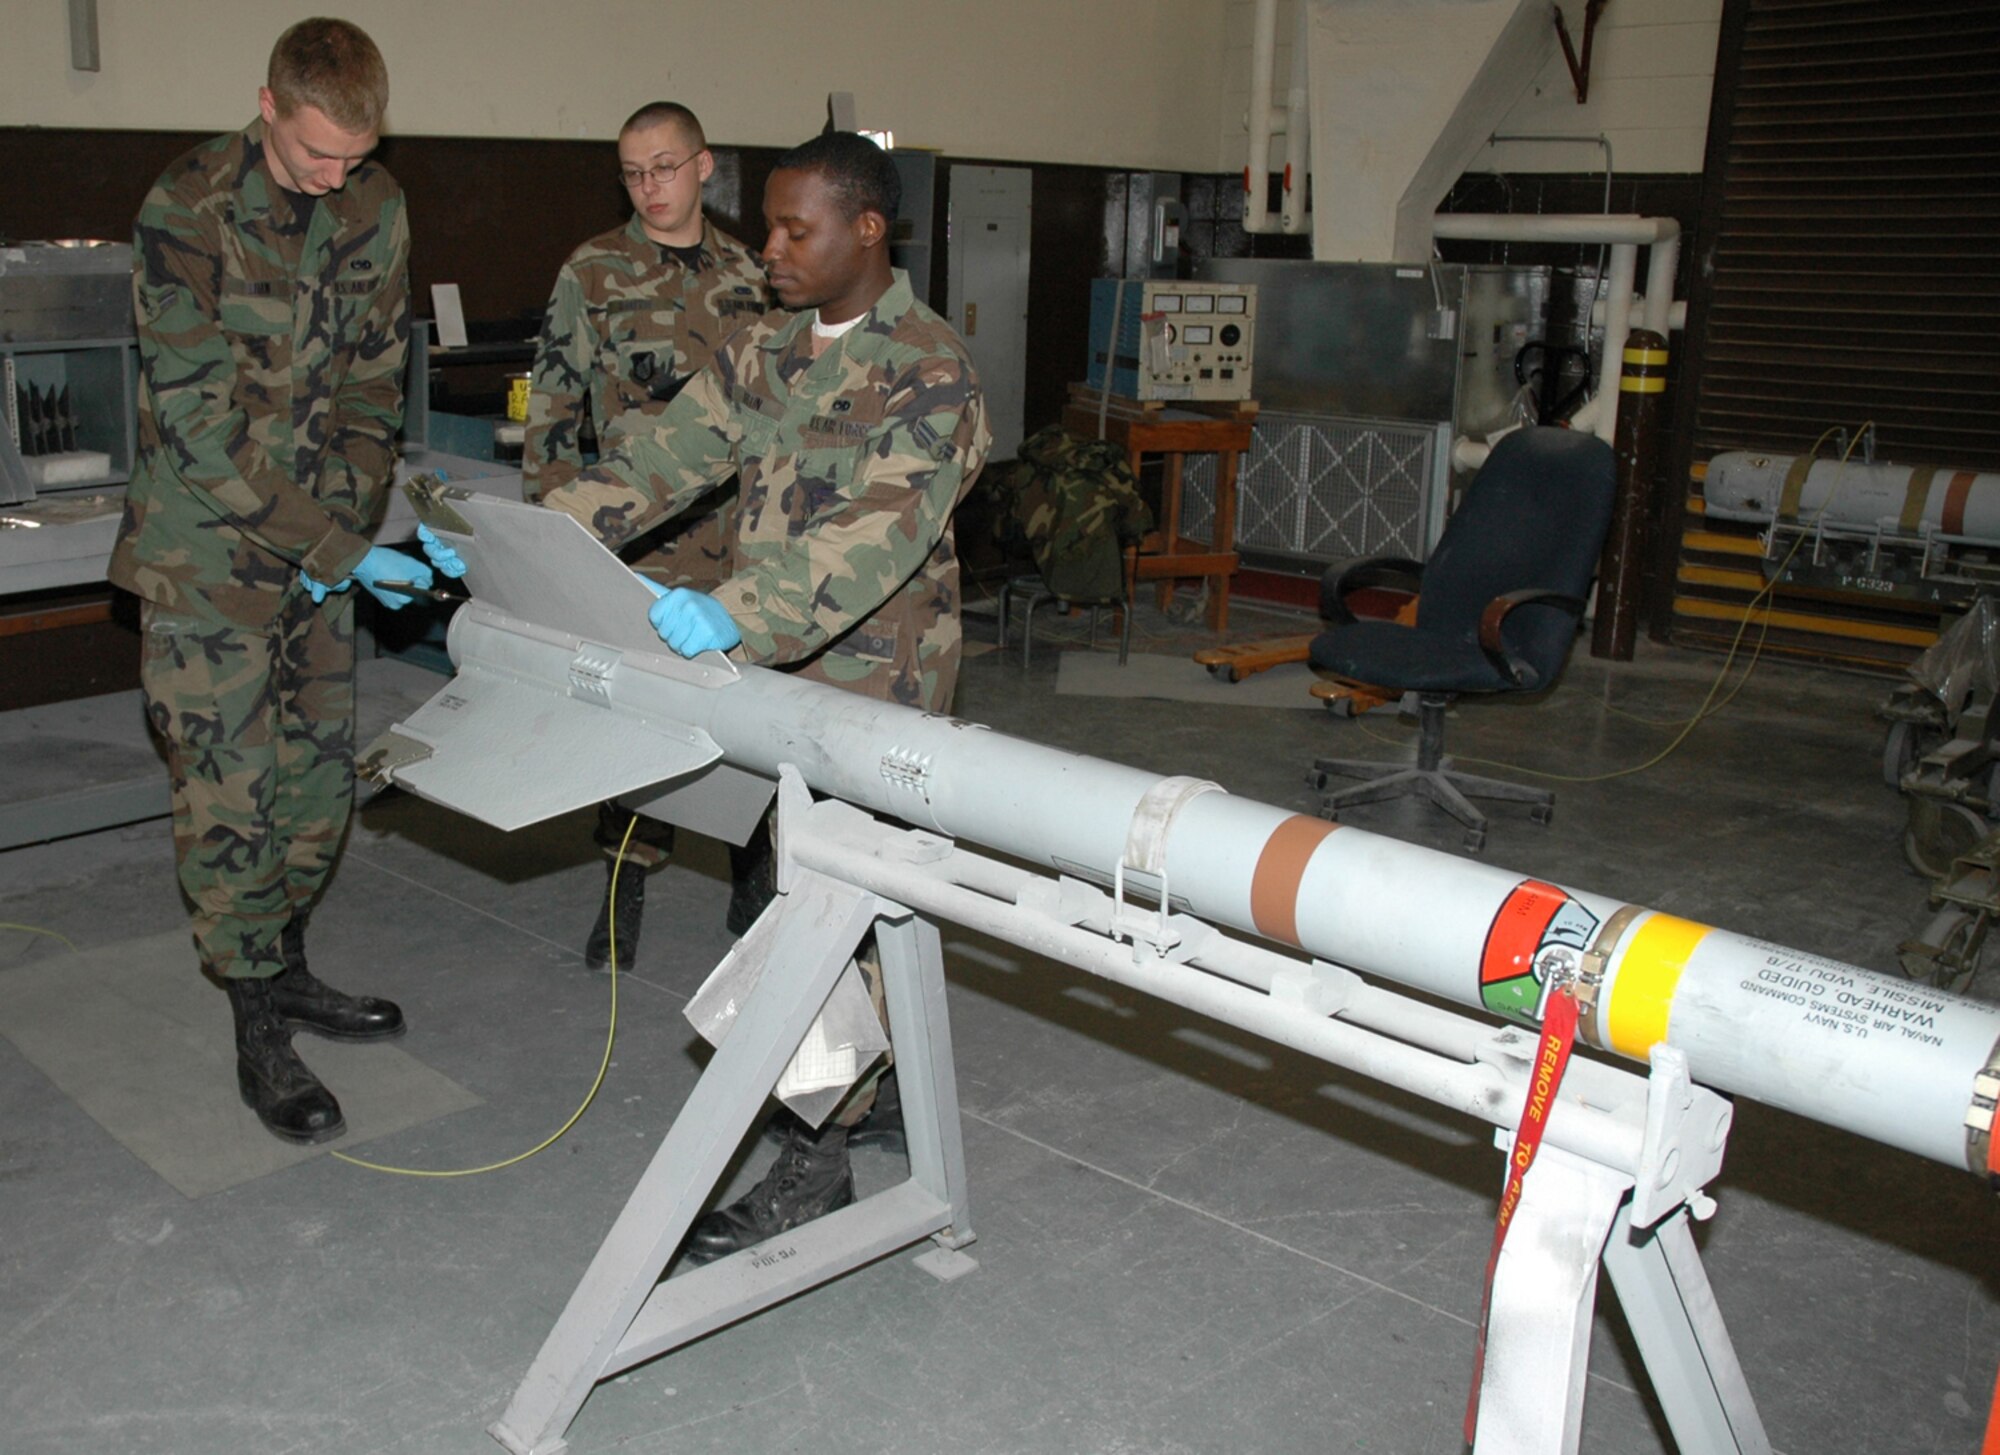 OSAN AIR BASE, Republic of Korea --  Airmen 1st Class Jesse Shaw and Theopolis Austin remove a fin from an AIM-9 missile while Airman 1st Class Cody Smith goes over the technical orders for the operation. (U.S. Air Force photo by Staff Sgt. Benjamin Rojek)